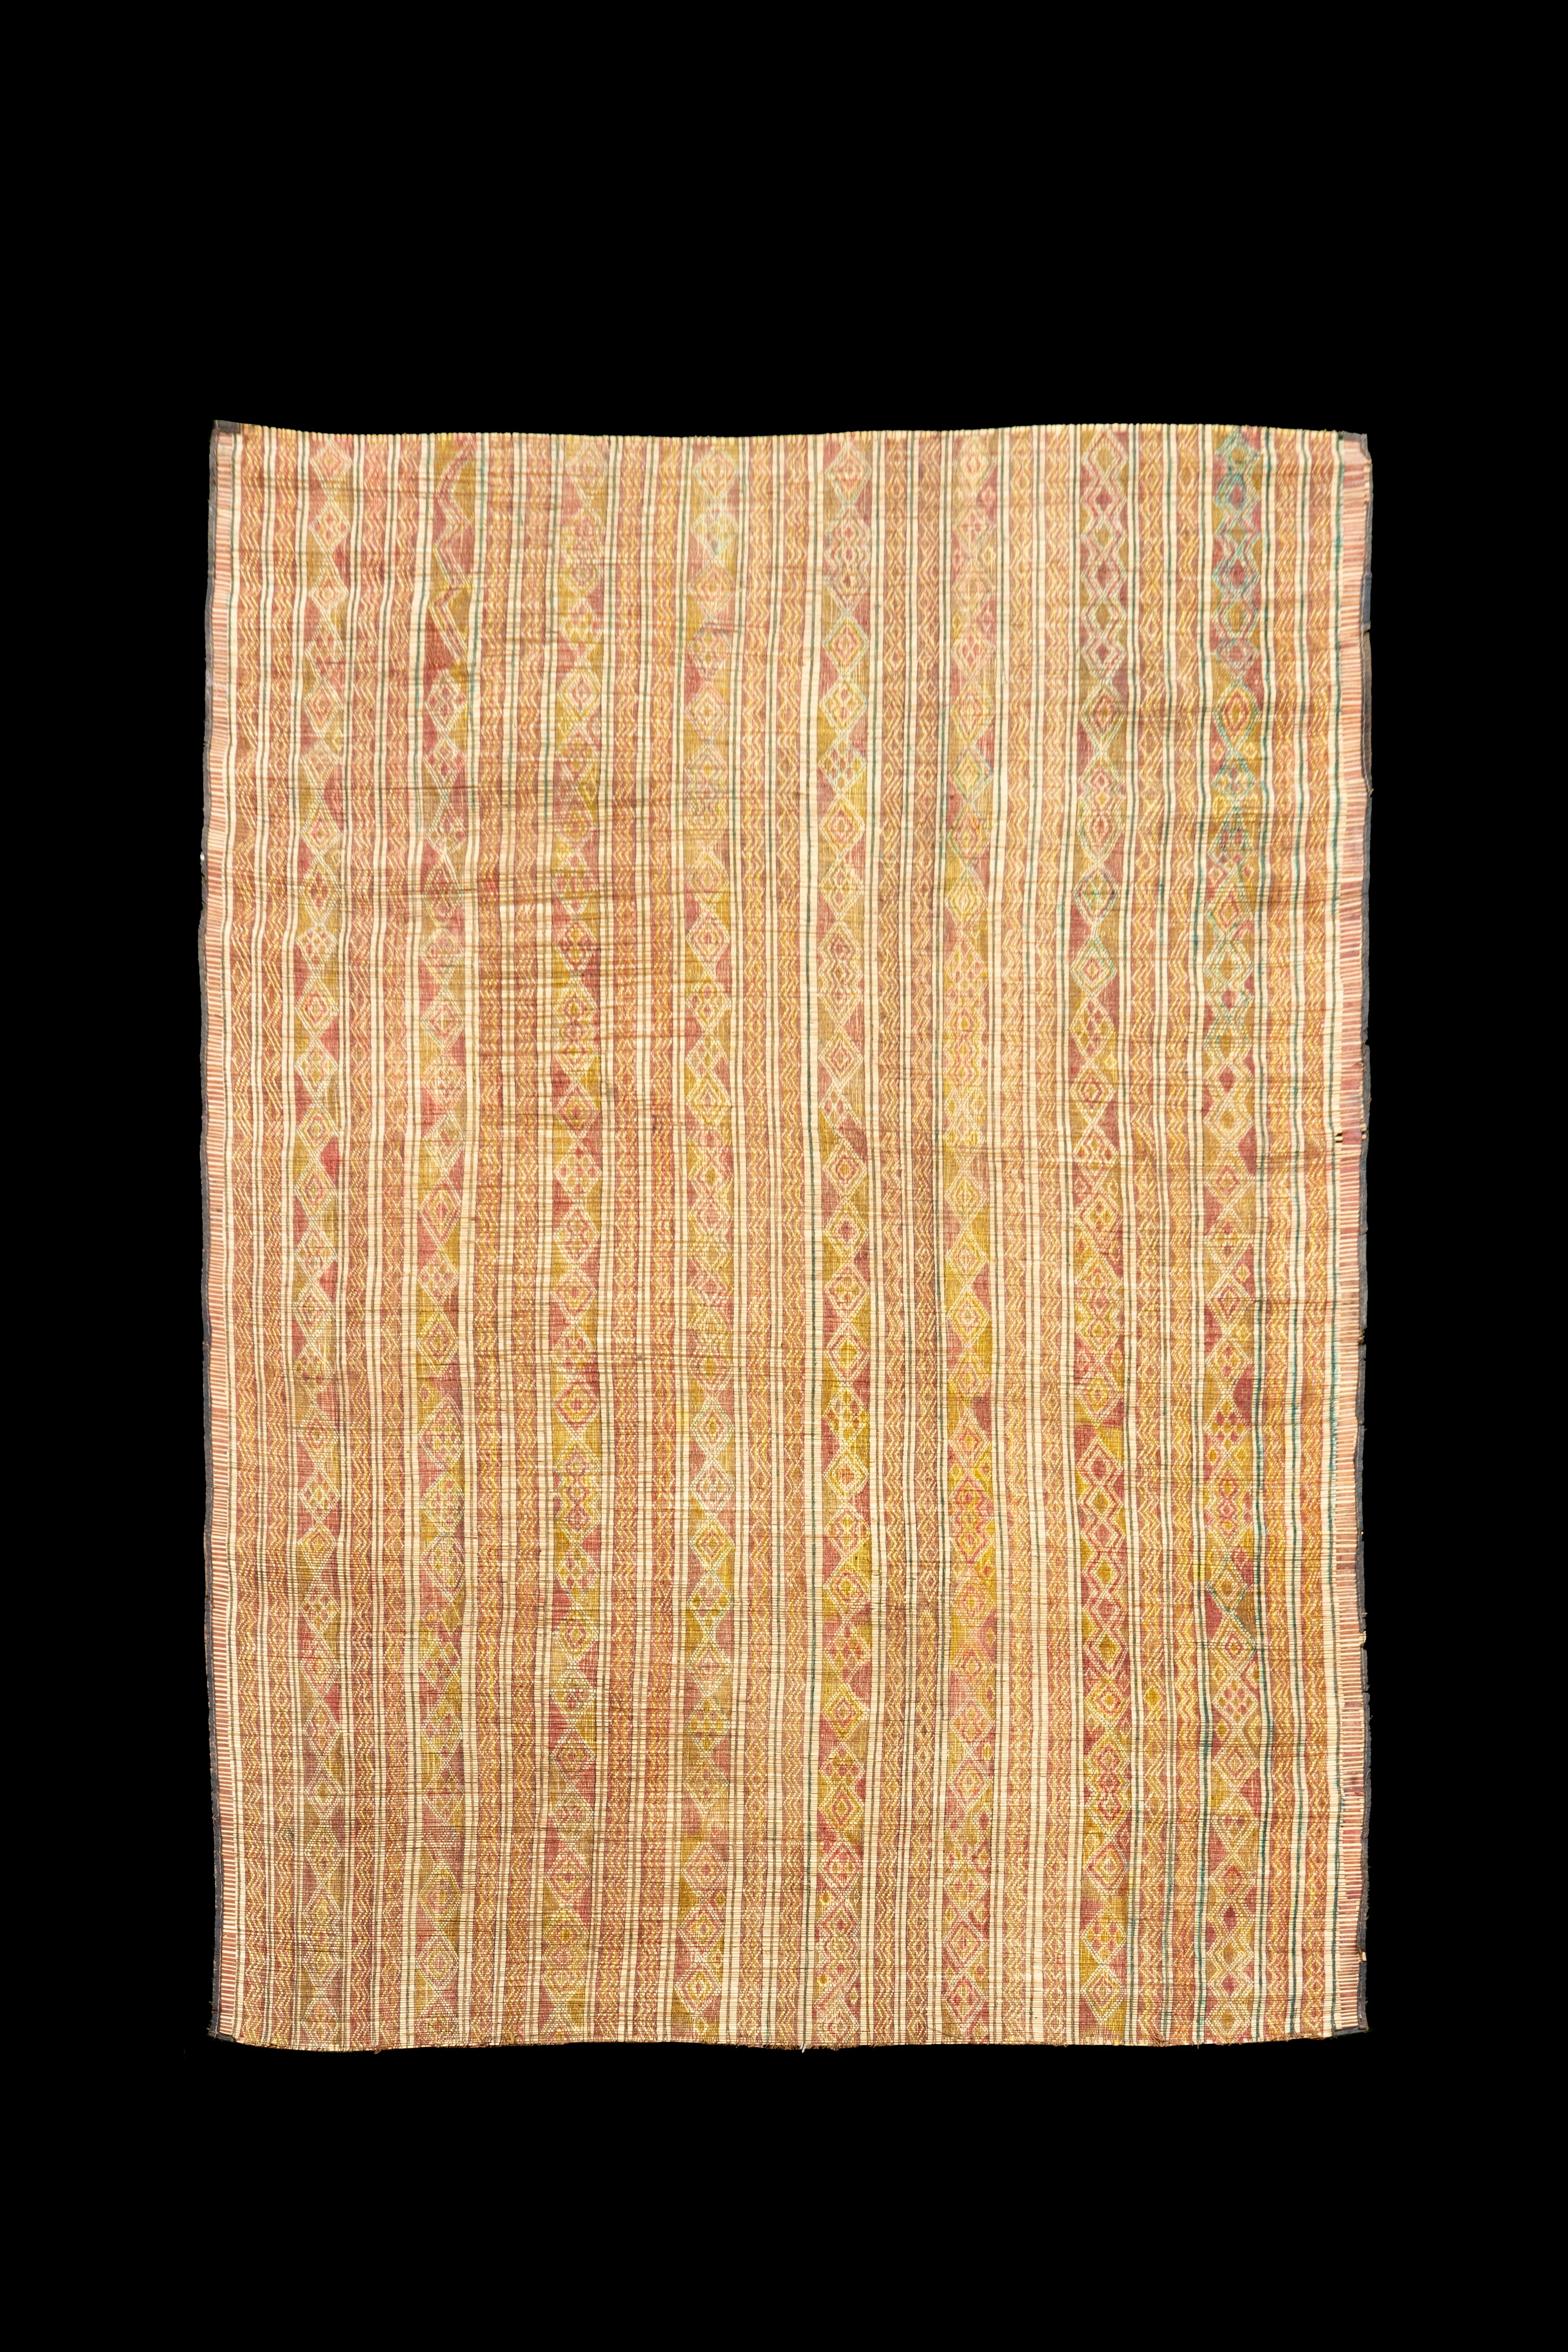 Mauritanian rug.  This Moroccan Mauritanian (Tuareg) leather mat is made of dwarf palm tree fibers and handwoven with leather stripes. The beautiful design is typical of the northern African culture that made it, Tuareg tribes from Mauritania.